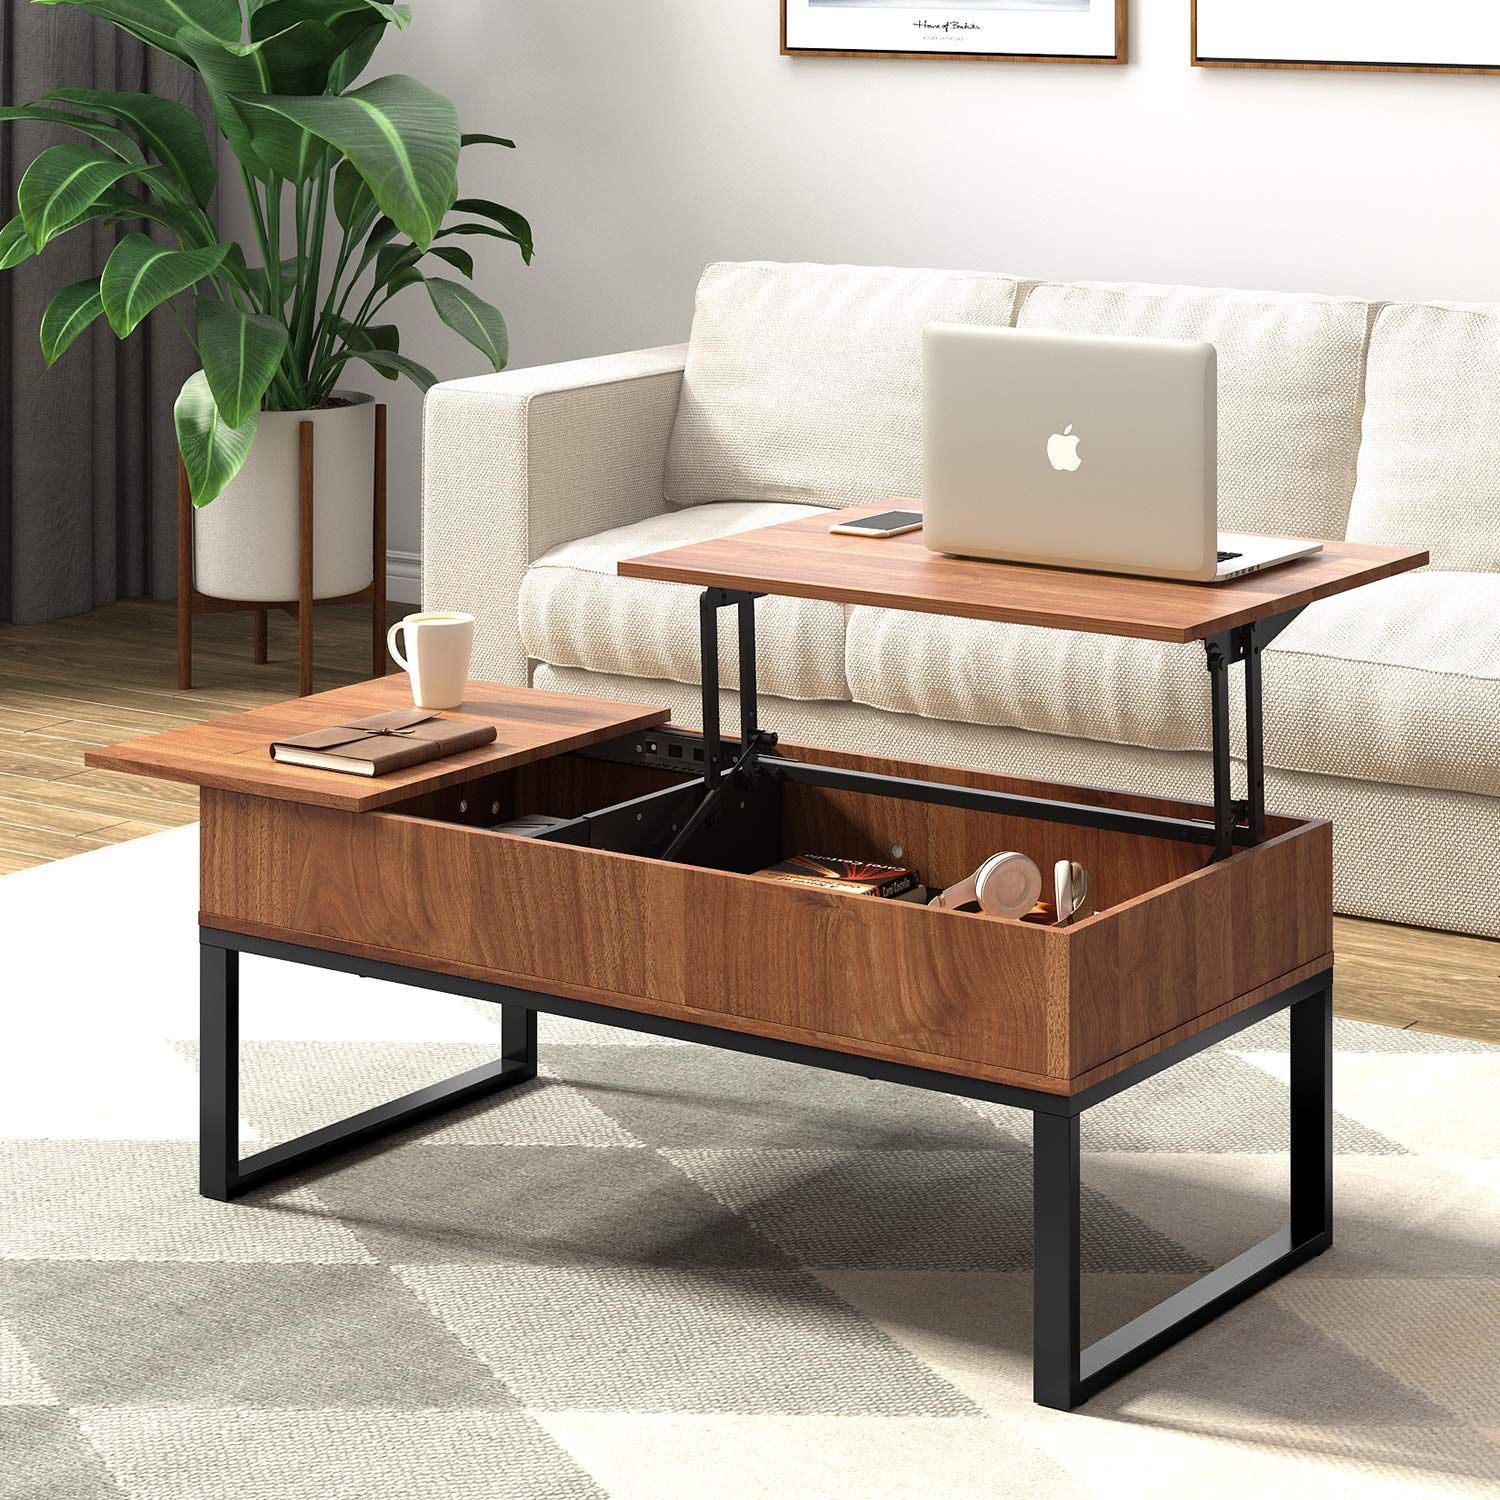 Wlive Wood Coffee Table With Adjustable Lift Top Table, Metal Frame Pertaining To Lift Top Coffee Tables With Hidden Storage Compartments (Gallery 5 of 20)